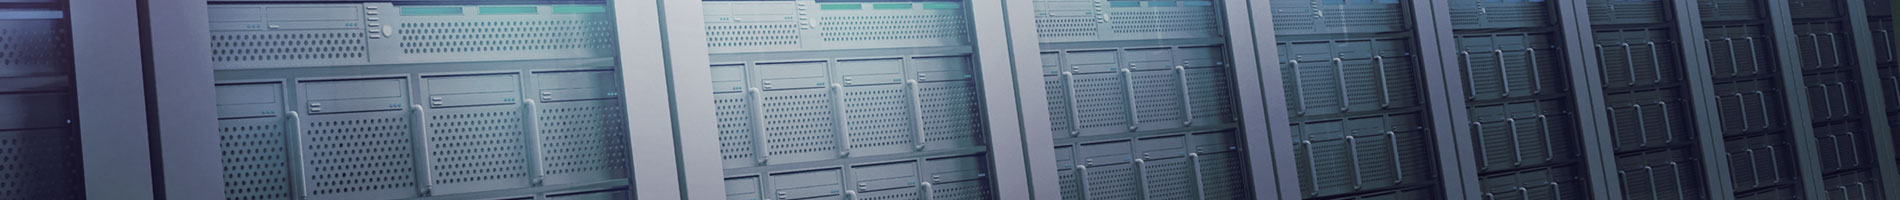 IT Services banner image